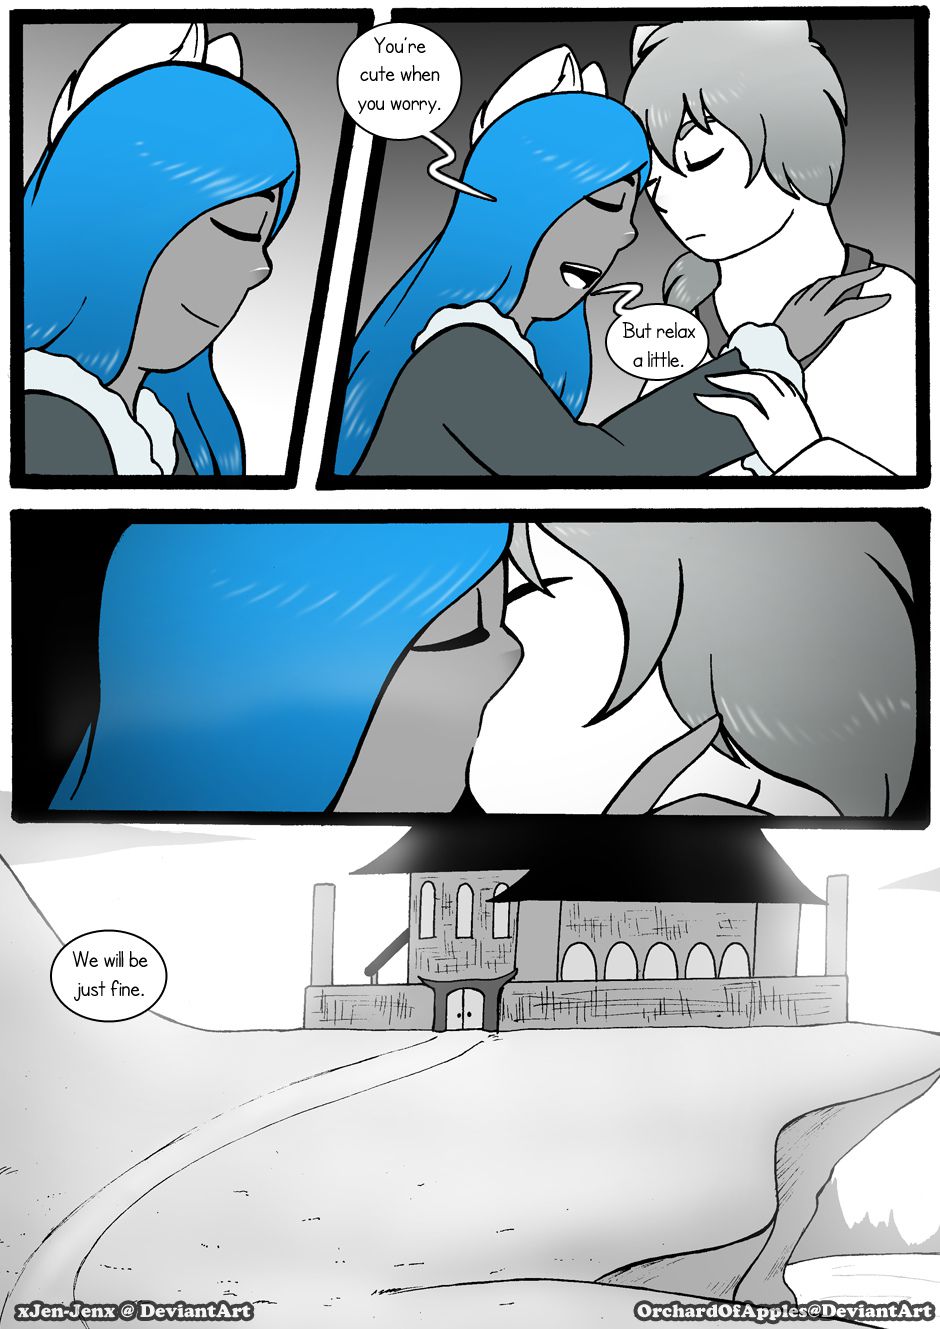 [Jeny-jen94] Between Kings and Queens [Ongoing] 193